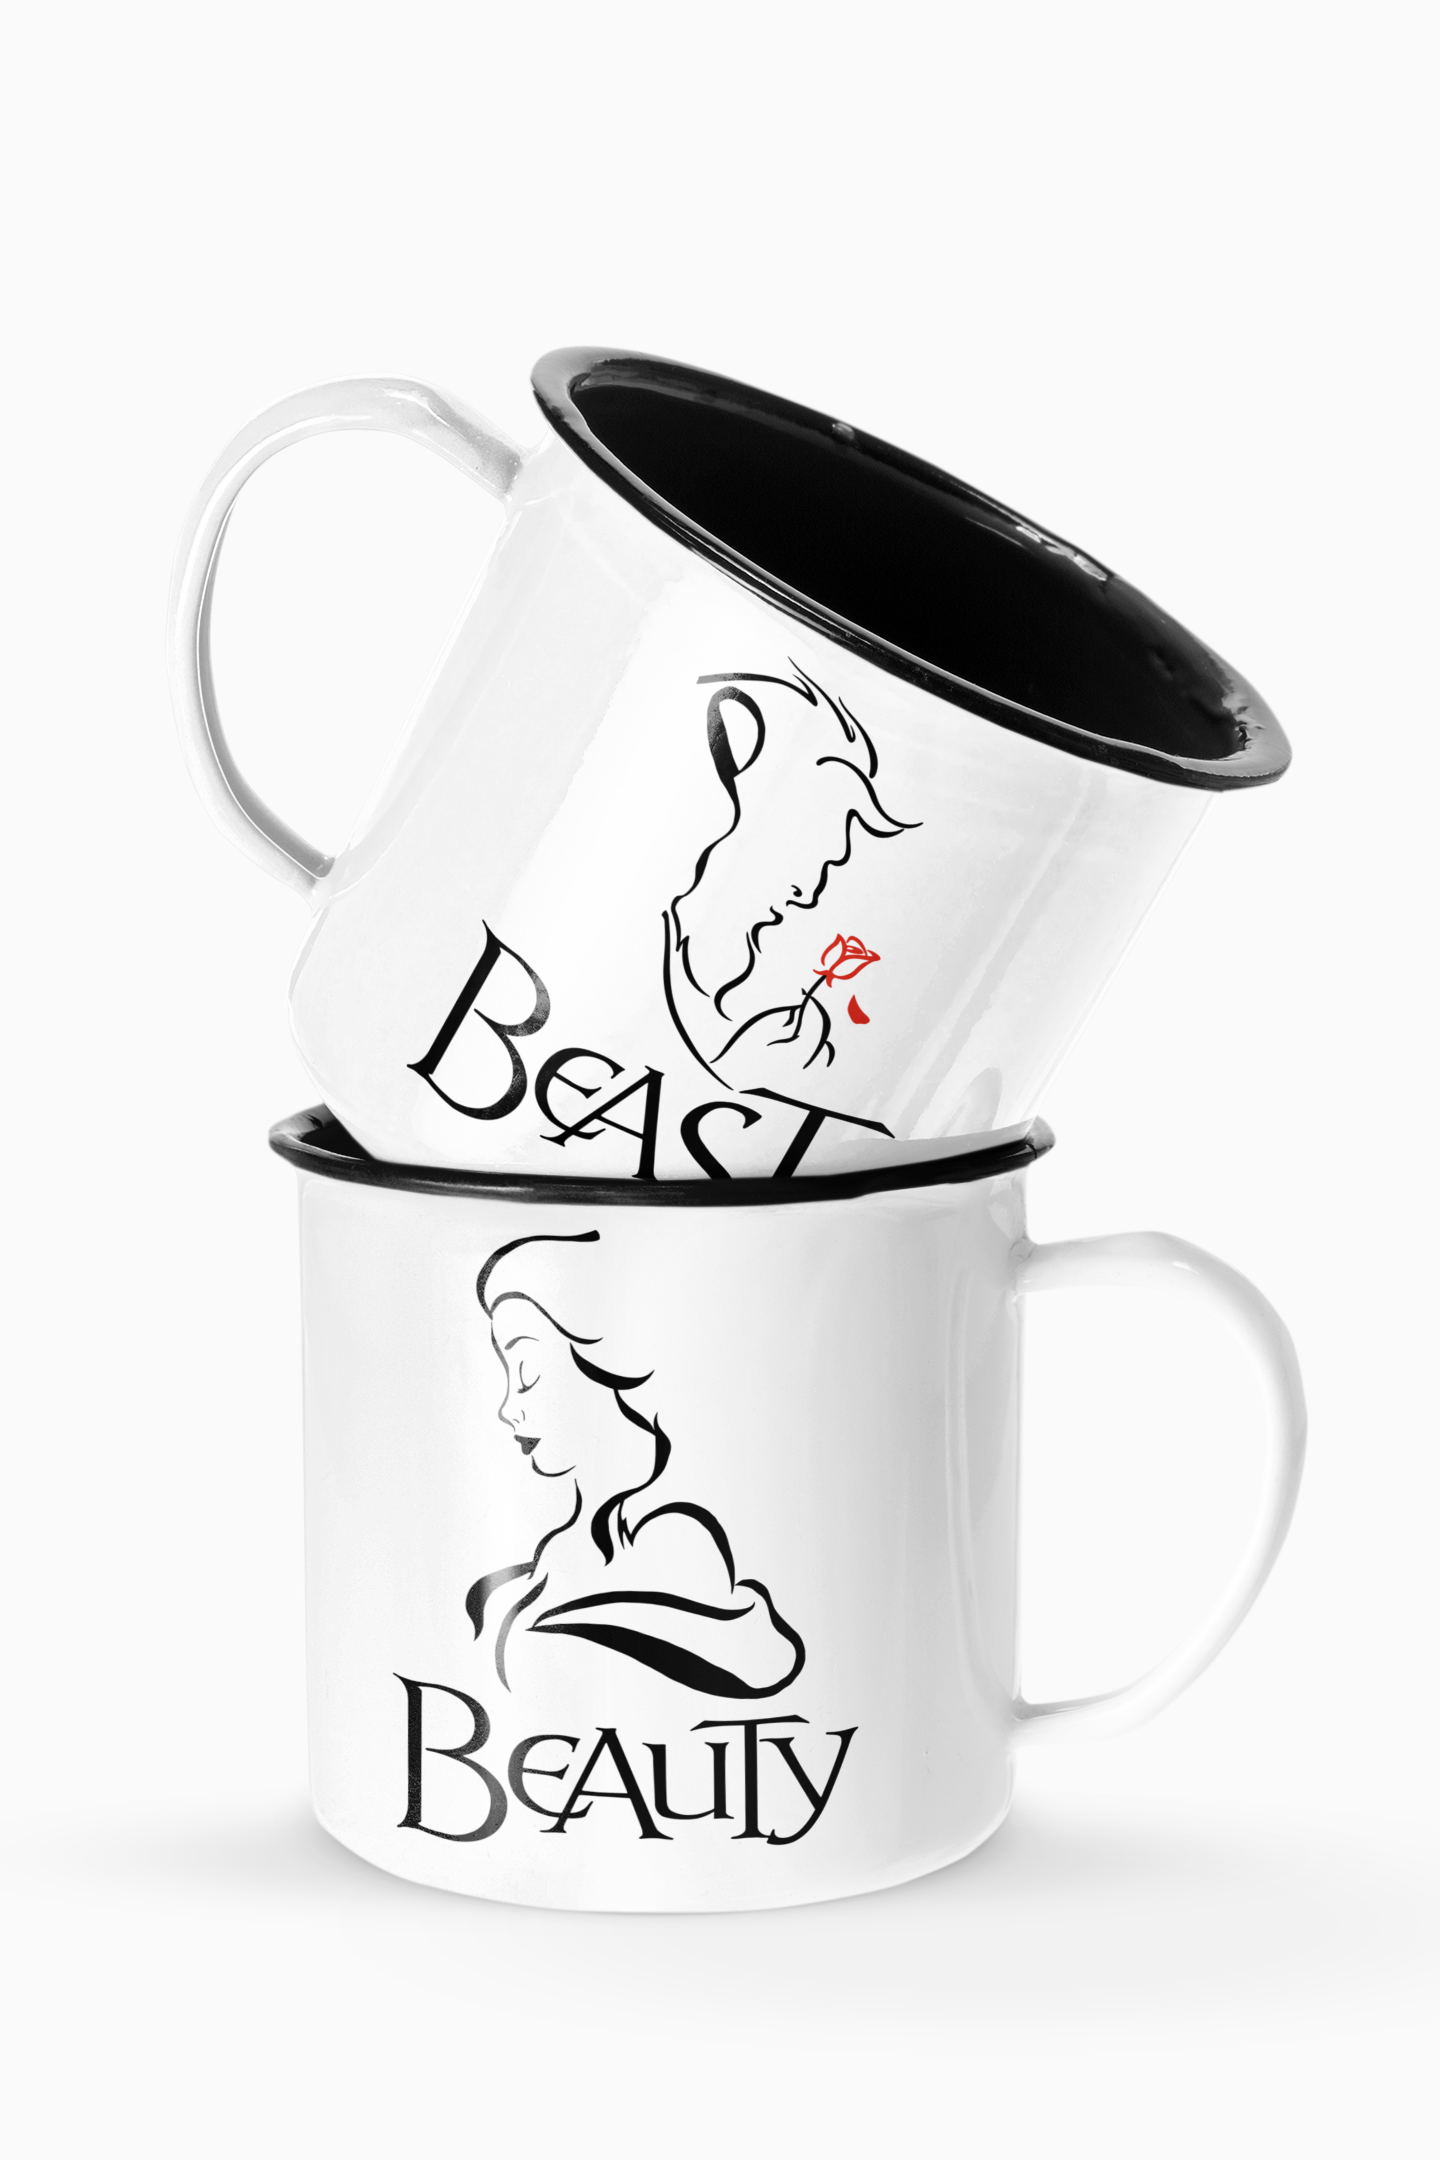 Beauty And The Beast 2 Couples Enamel Camp Cup Set Wedding Enamel Couples Gift